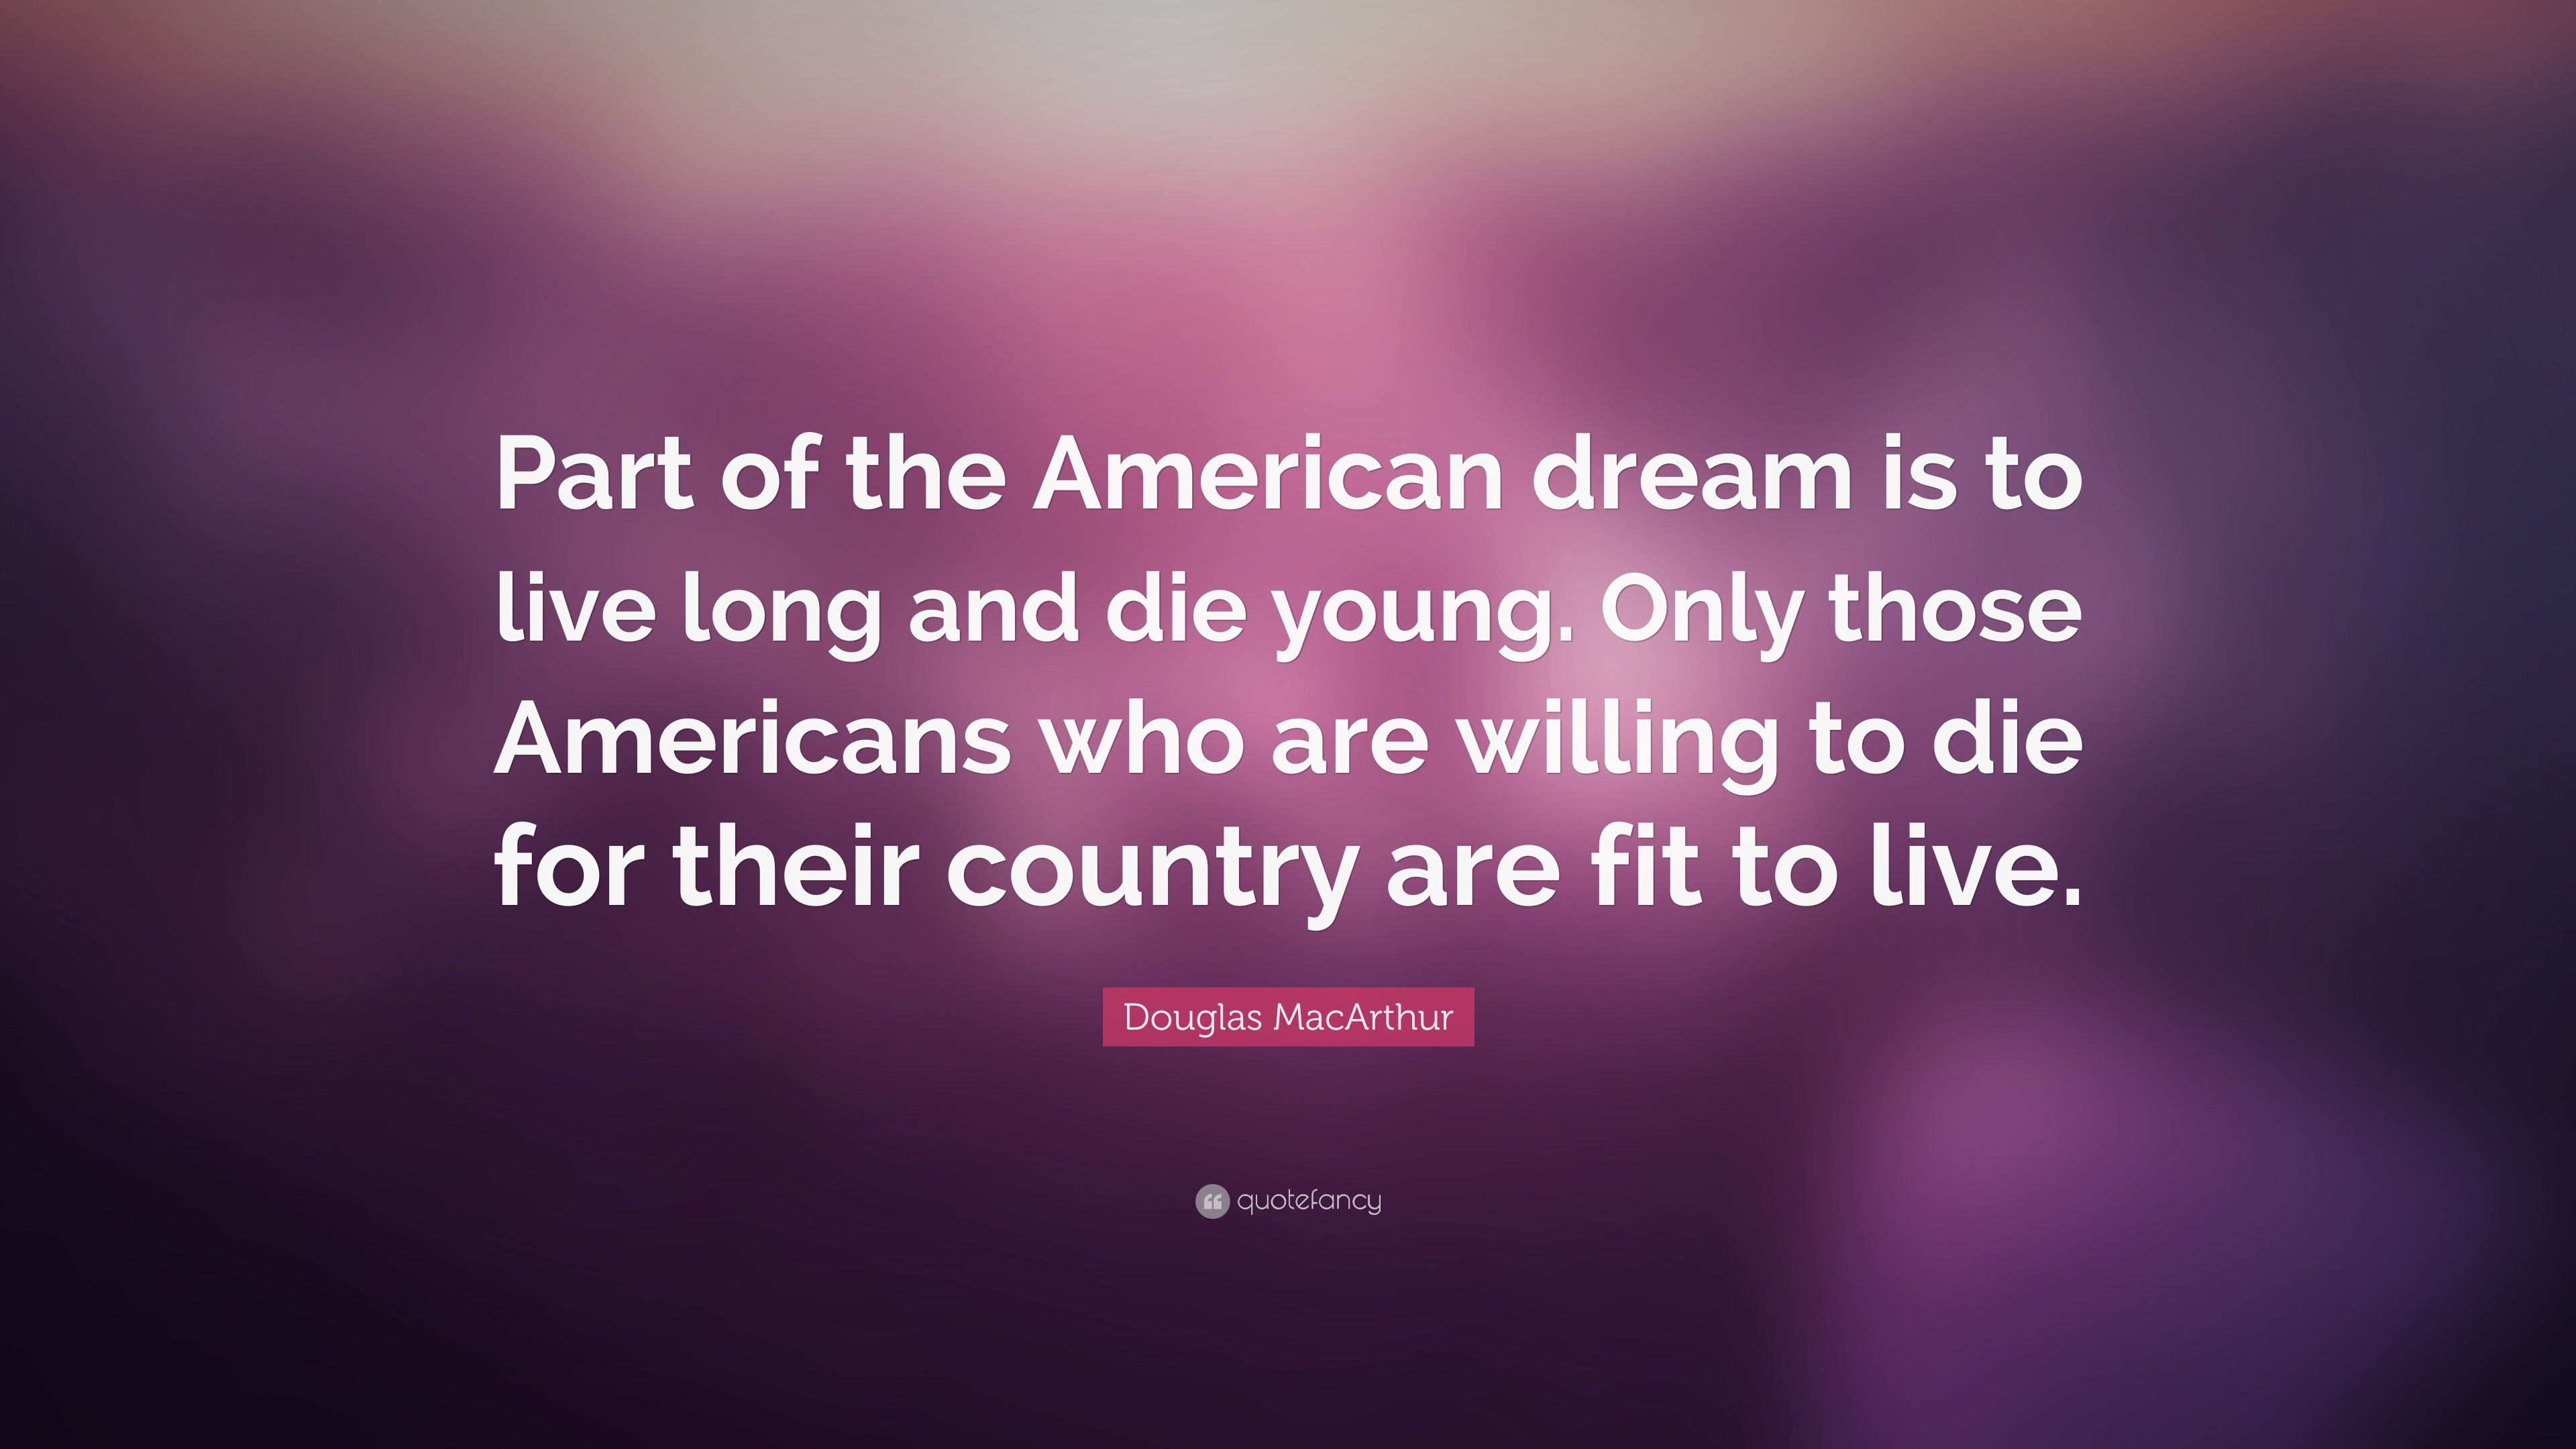 Douglas MacArthur Quote: “Part of the American dream is to live long ...